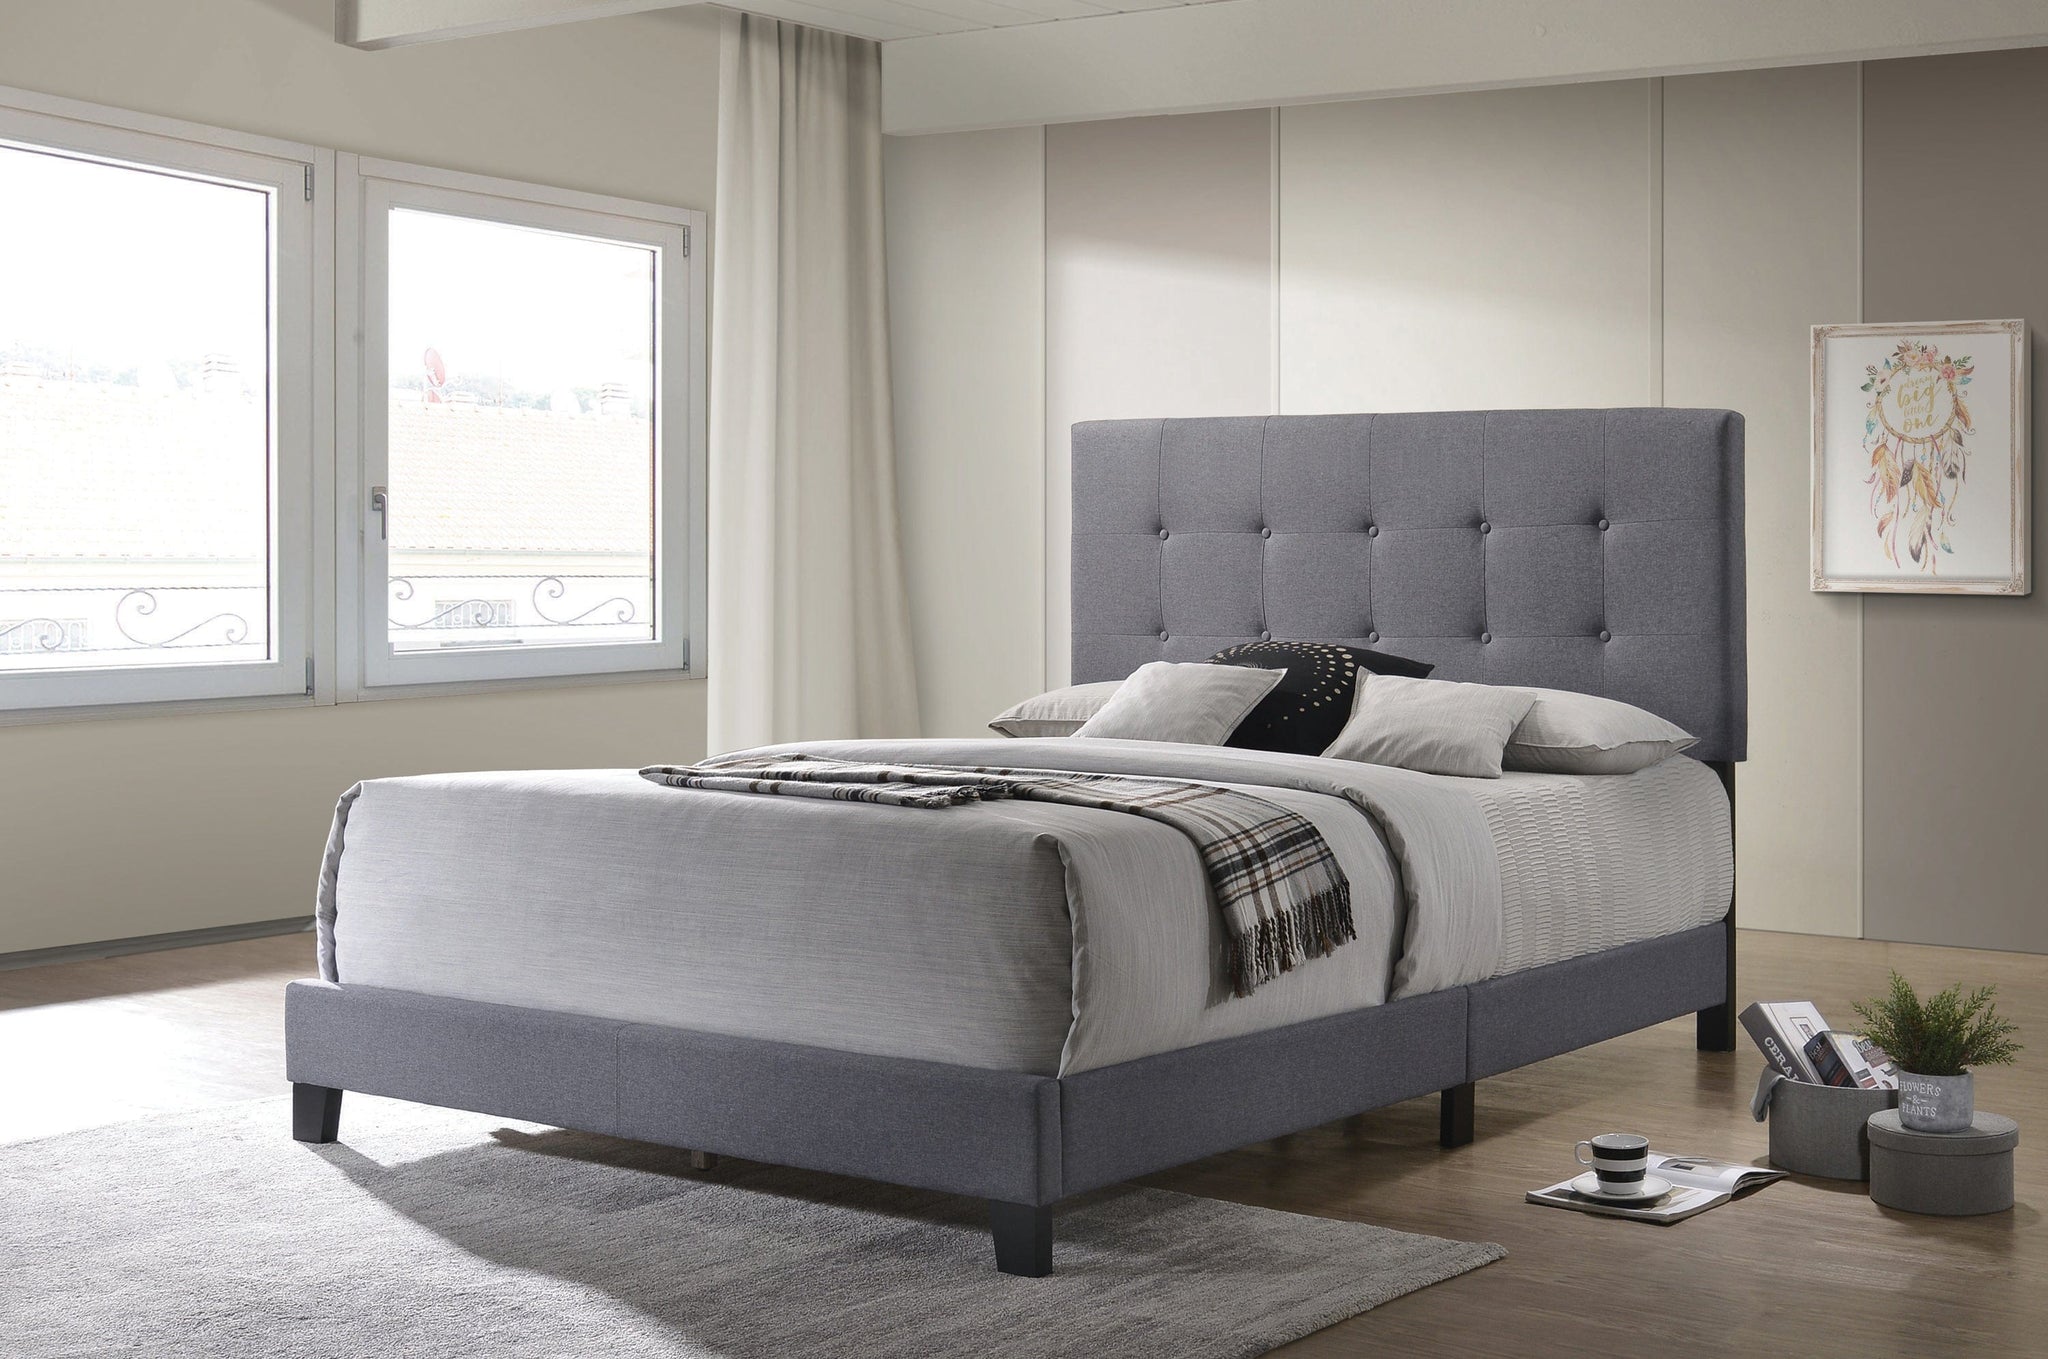 Mapes Tufted Upholstered Full Bed Grey - 305747F